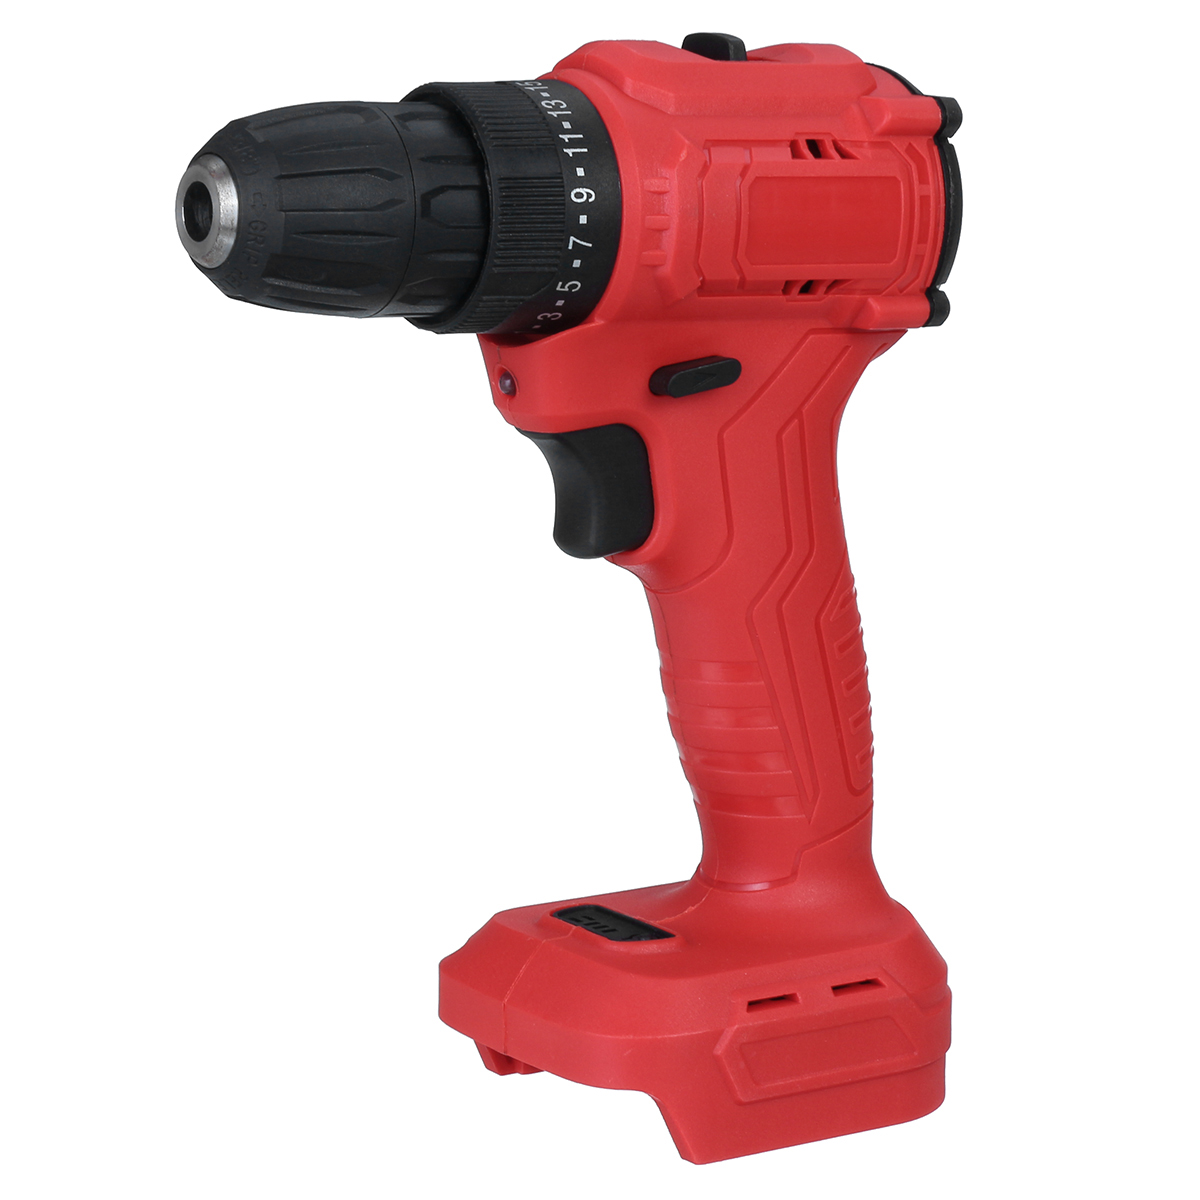 350Nm-1800rpm-Brushless-Electric-Drill-LED-Rechargeable-Power-Drill-For-Makita-18V-Battery-1735667-7